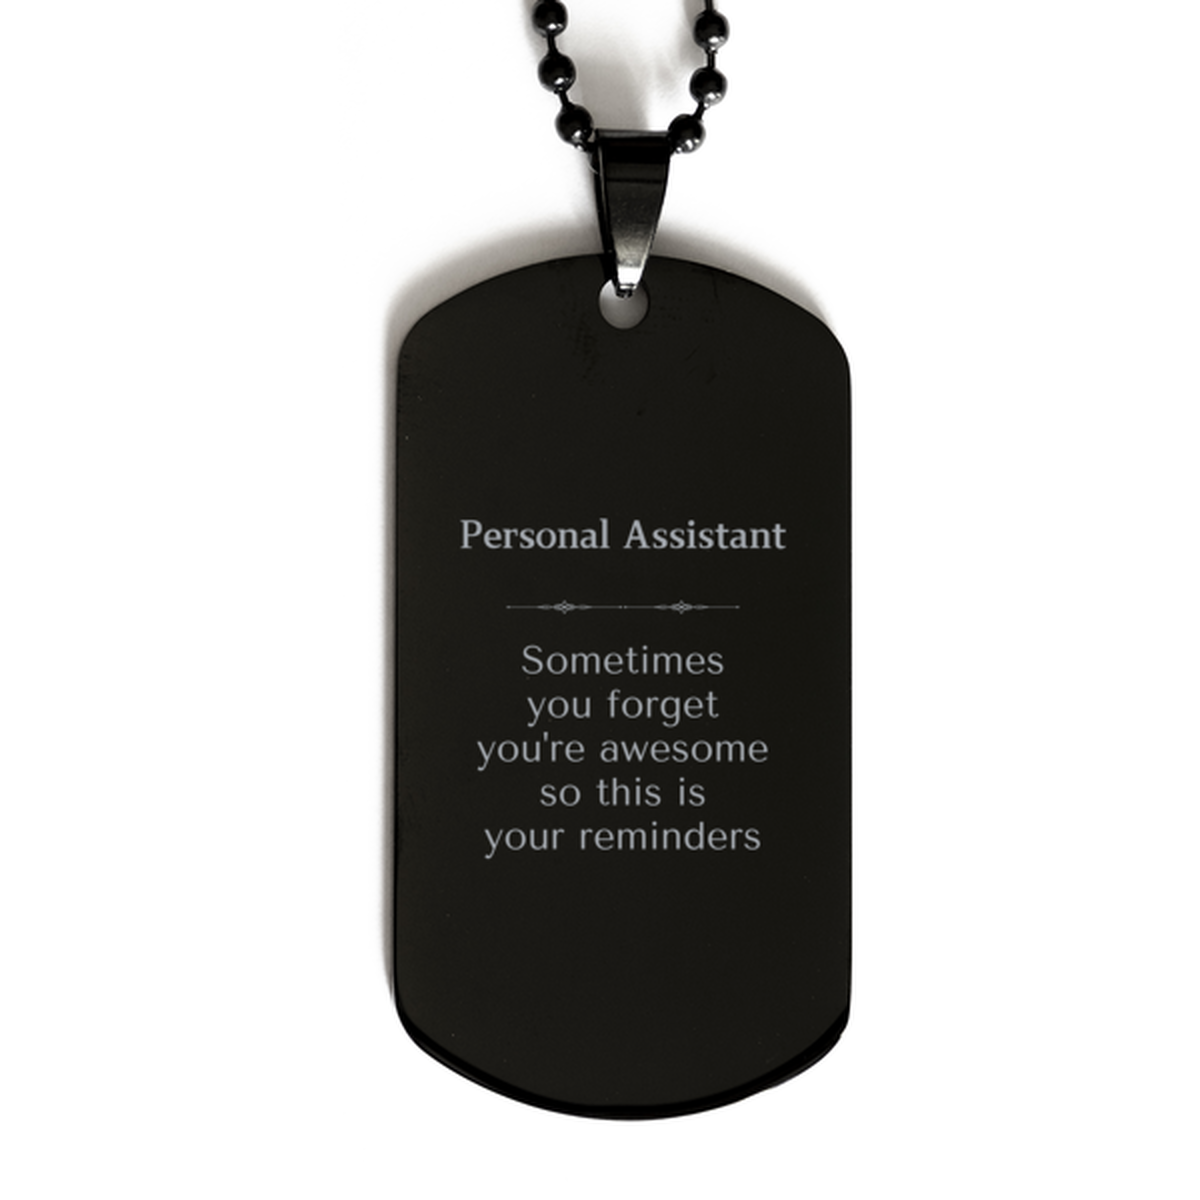 Sentimental Personal Assistant Black Dog Tag, Personal Assistant Sometimes you forget you're awesome so this is your reminders, Graduation Christmas Birthday Gifts for Personal Assistant, Men, Women, Coworkers